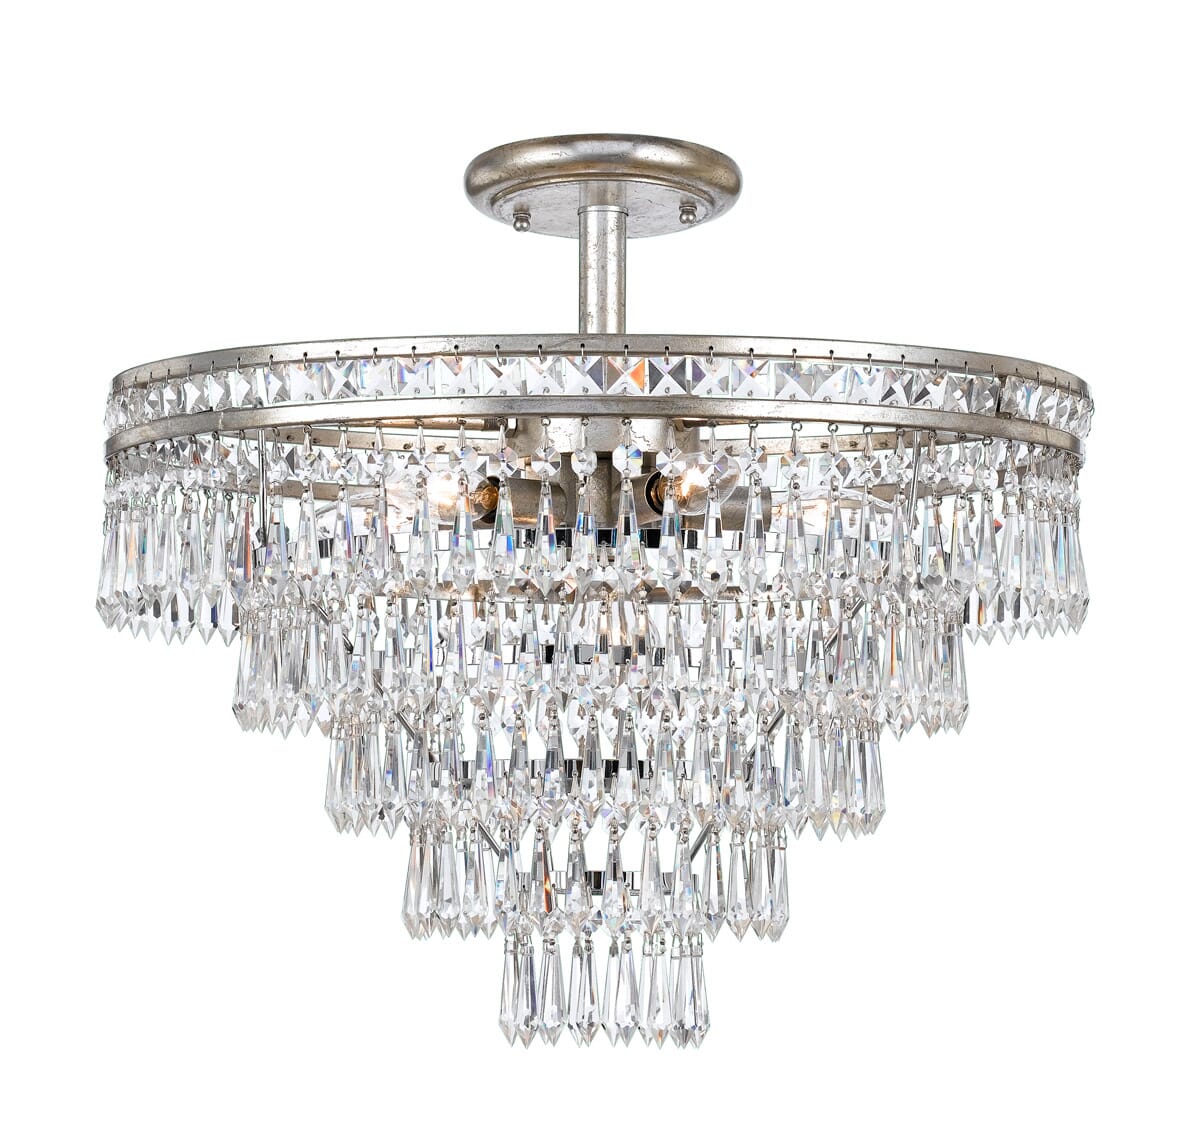 Mercer 6-Light 20"" Ceiling Light in Olde Silver with Hand Cut Crystal Crystals -  Crystorama, 5264-OS-CL-MWP_CEILING